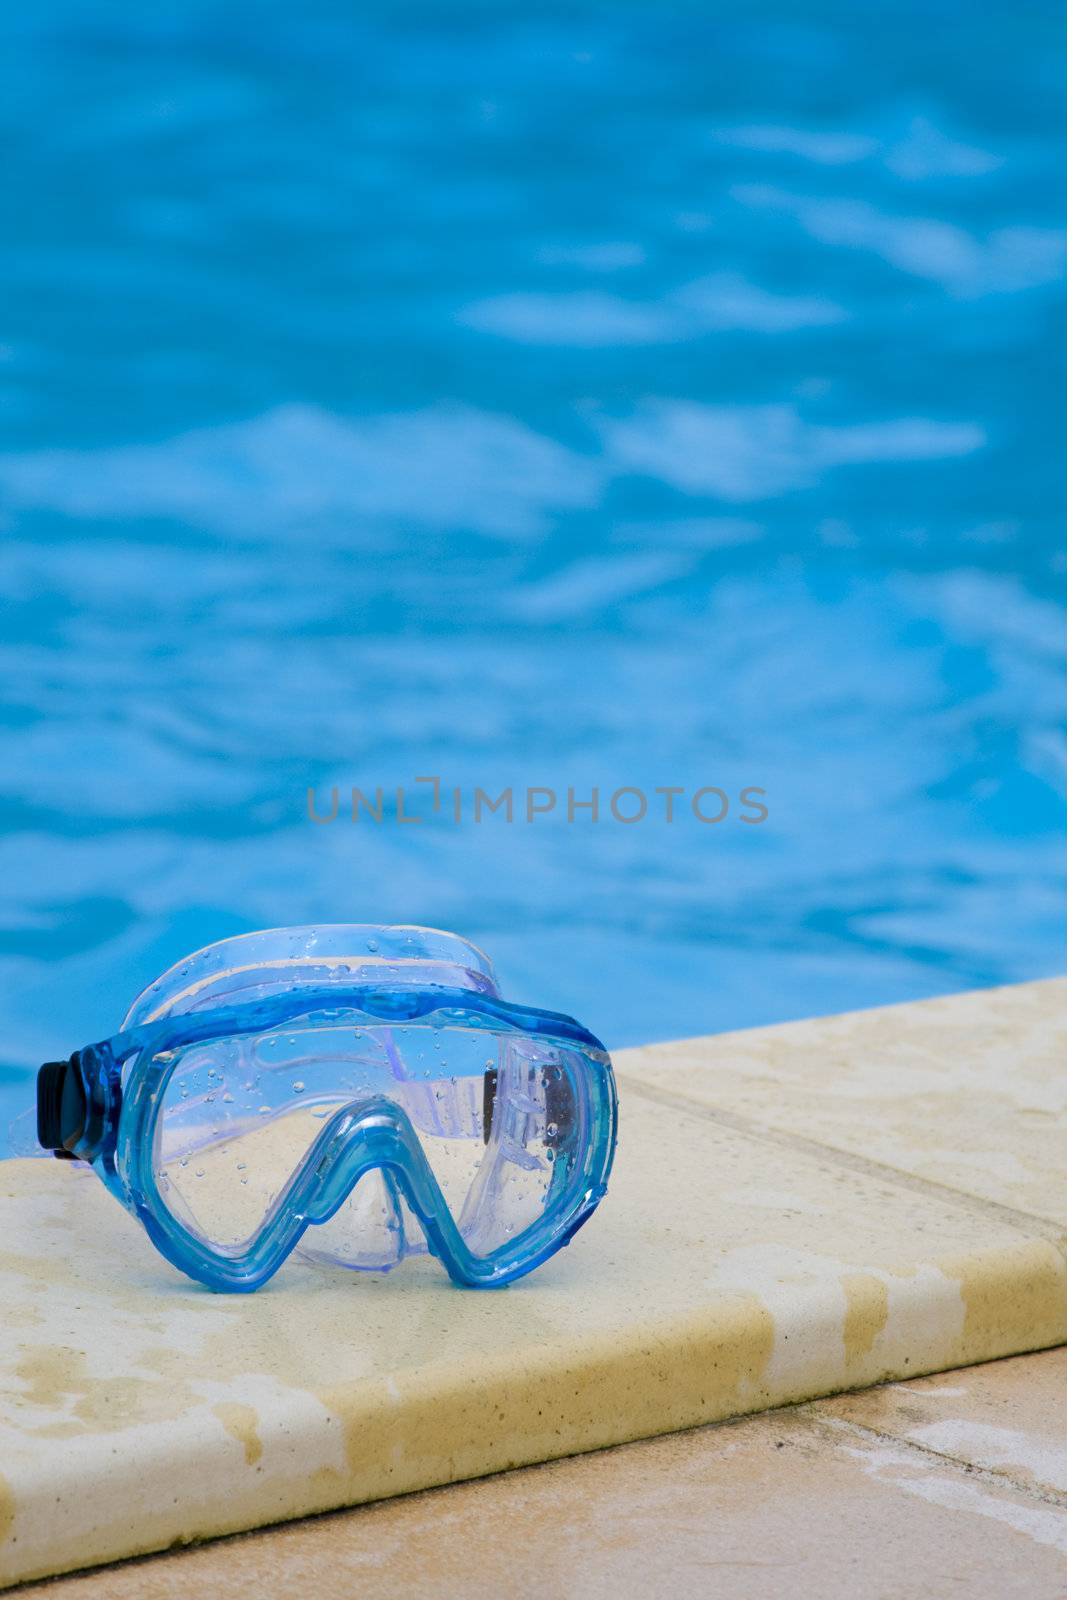 Diving mask on the bank of a swimming pool.